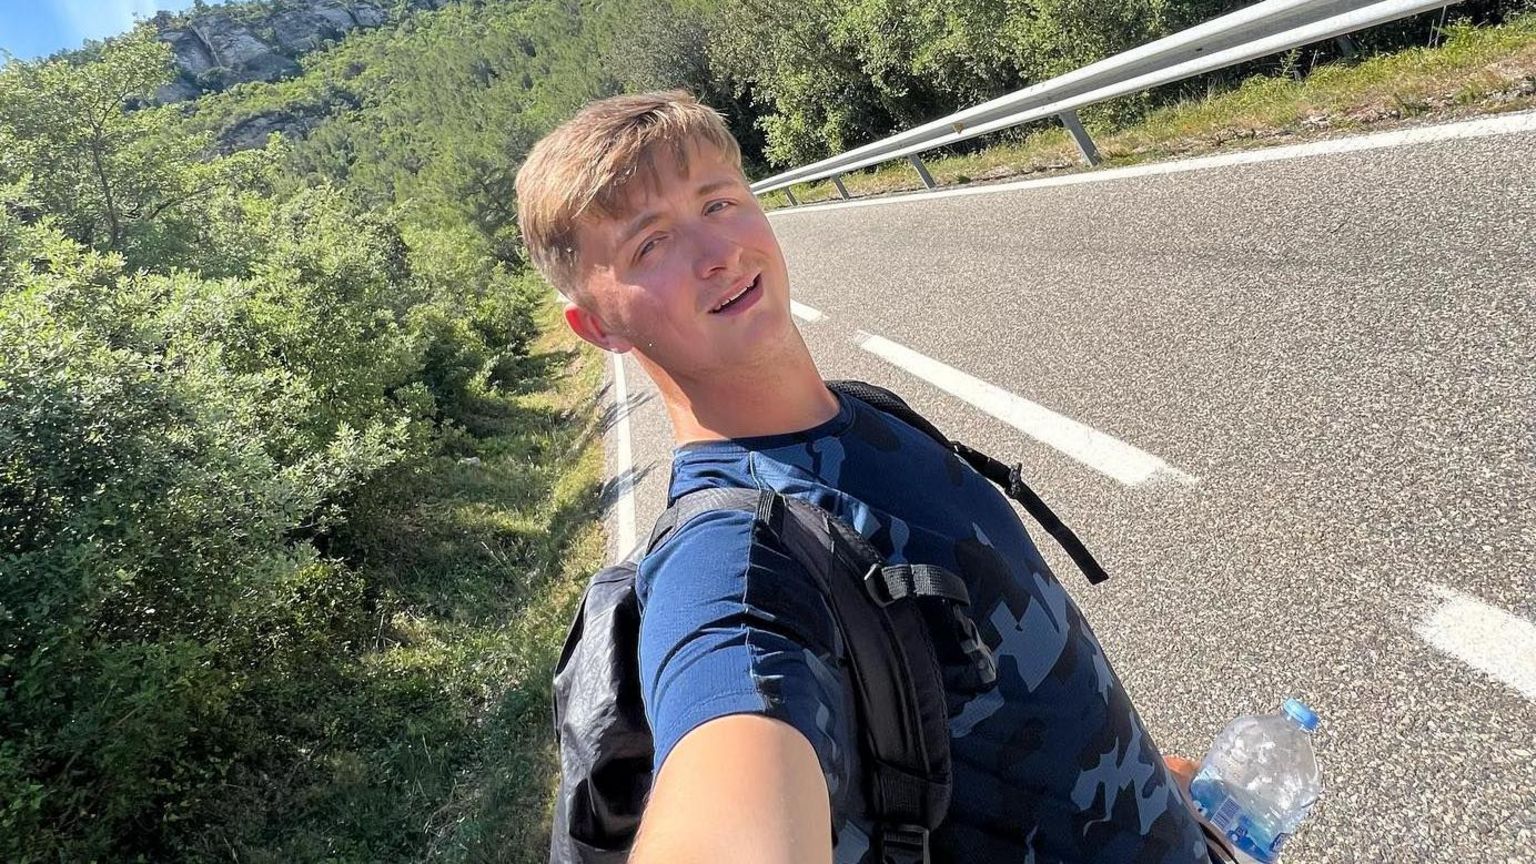 Henry Moores takes a selfie on a roadside during his journey.